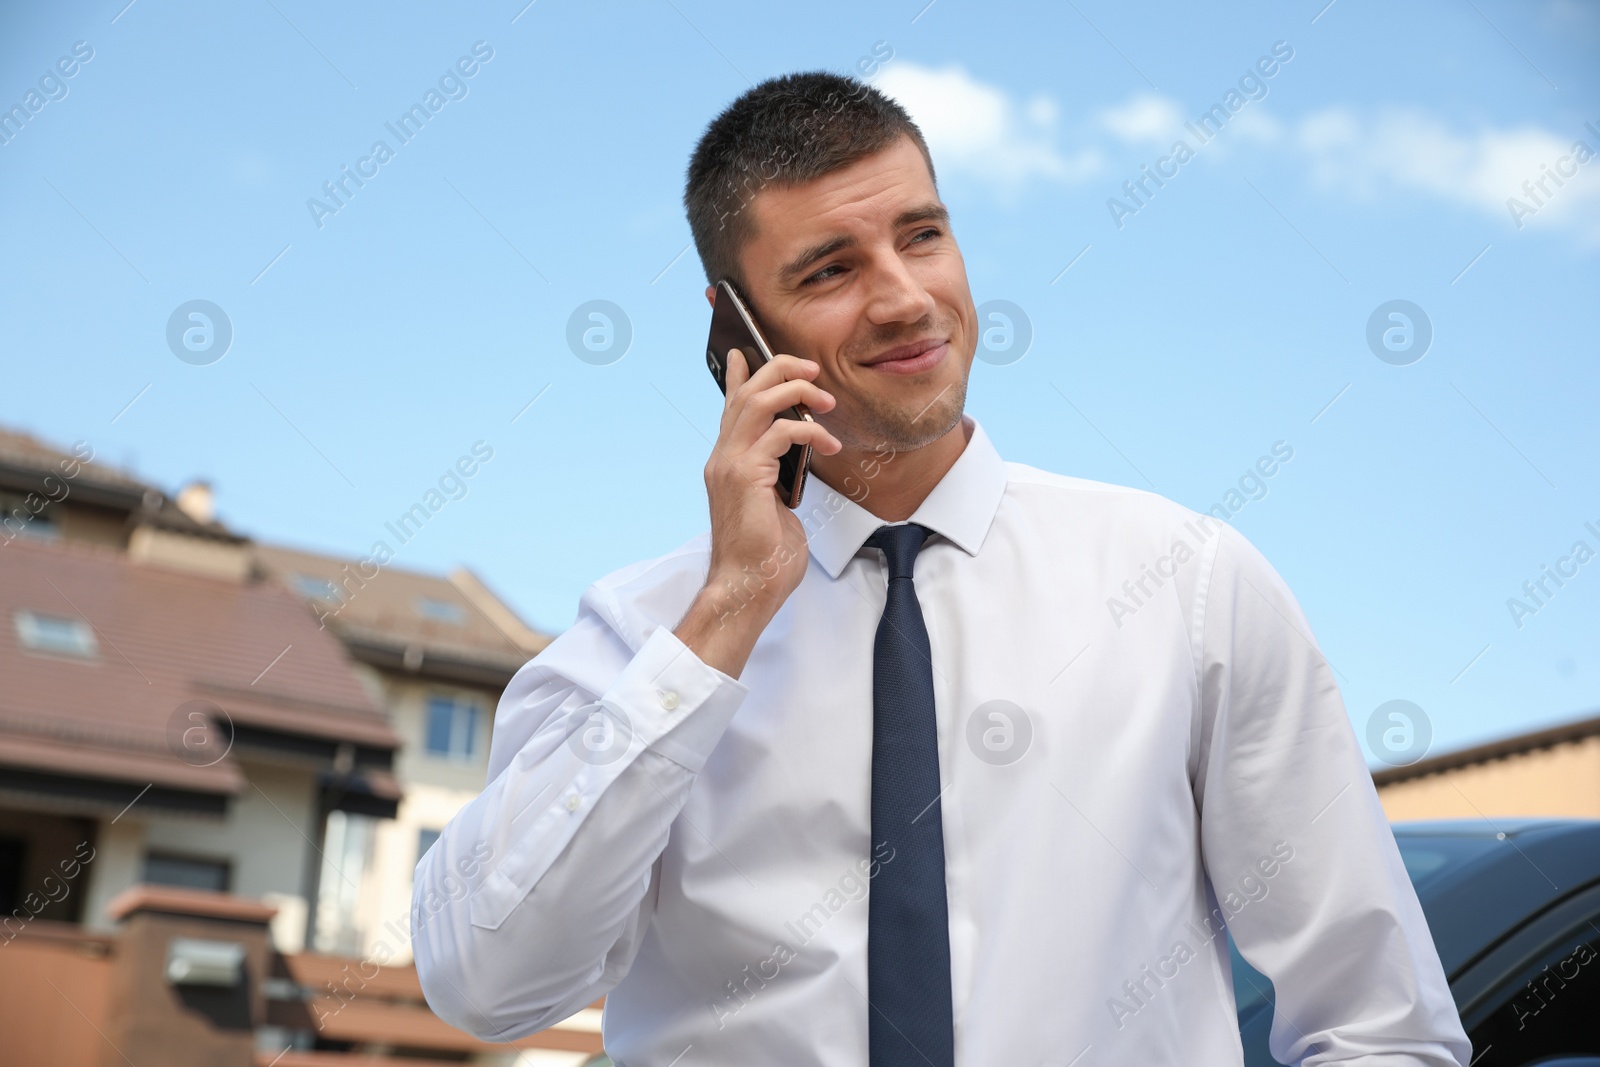 Photo of Attractive young man talking on phone near luxury car outdoors